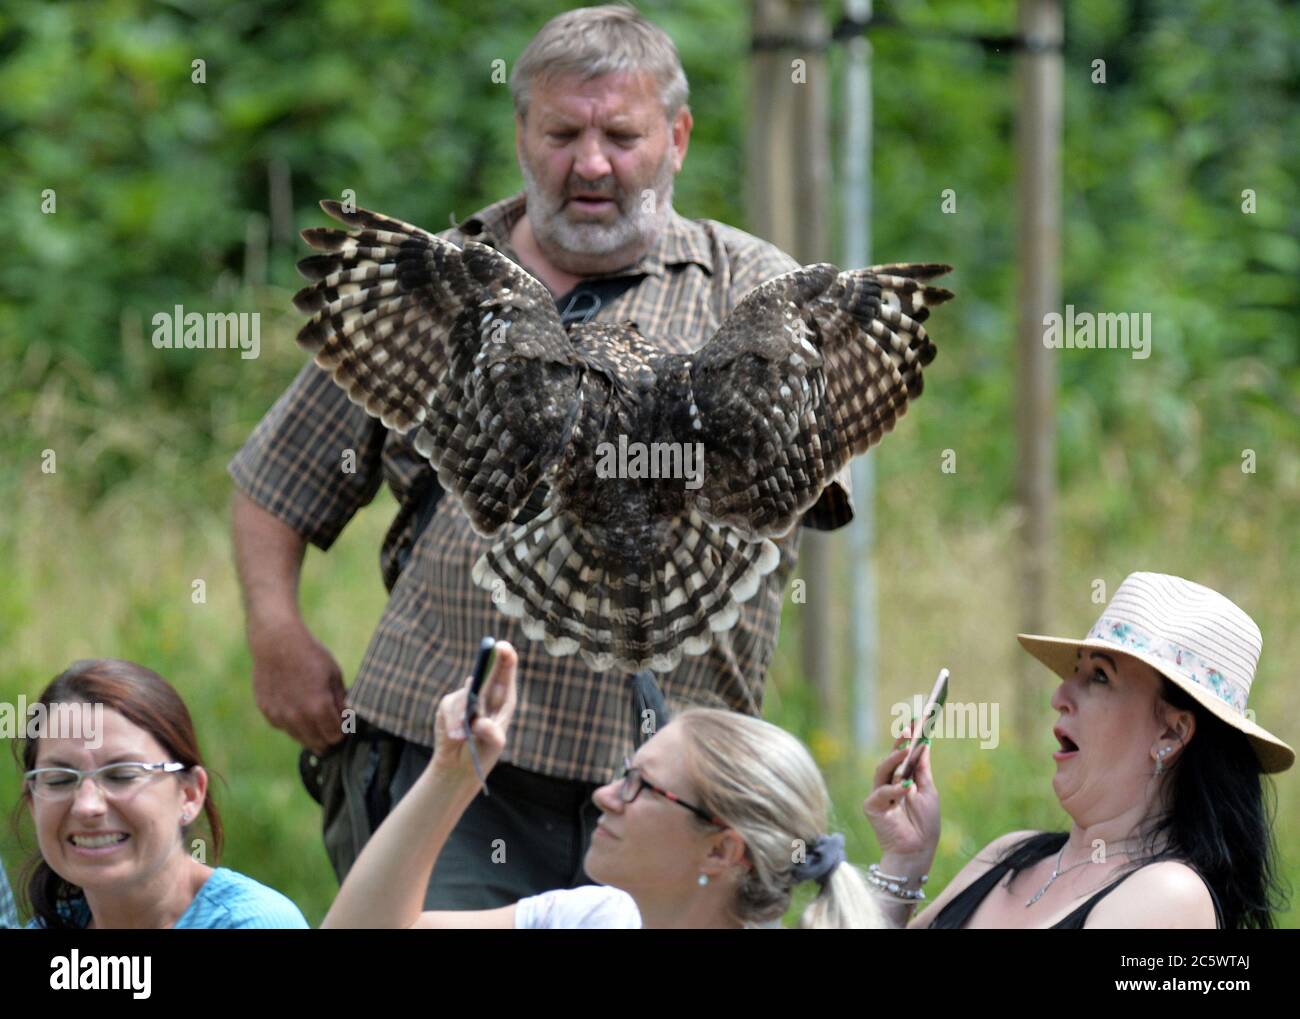 Jihlava, Czech Republic. 5th July, 2020. Falconer Eduard Skaloud (on photo) presents birds of prey to zoo visitors. Located at the Jihlava Zoo, you can come face to face with the magnificent bald eagle and beautiful owls. During the day you can experience one of the most exciting ''Birds of Prey'' displays in the Czech Repubic. Credit: Slavek Ruta/ZUMA Wire/Alamy Live News Stock Photo